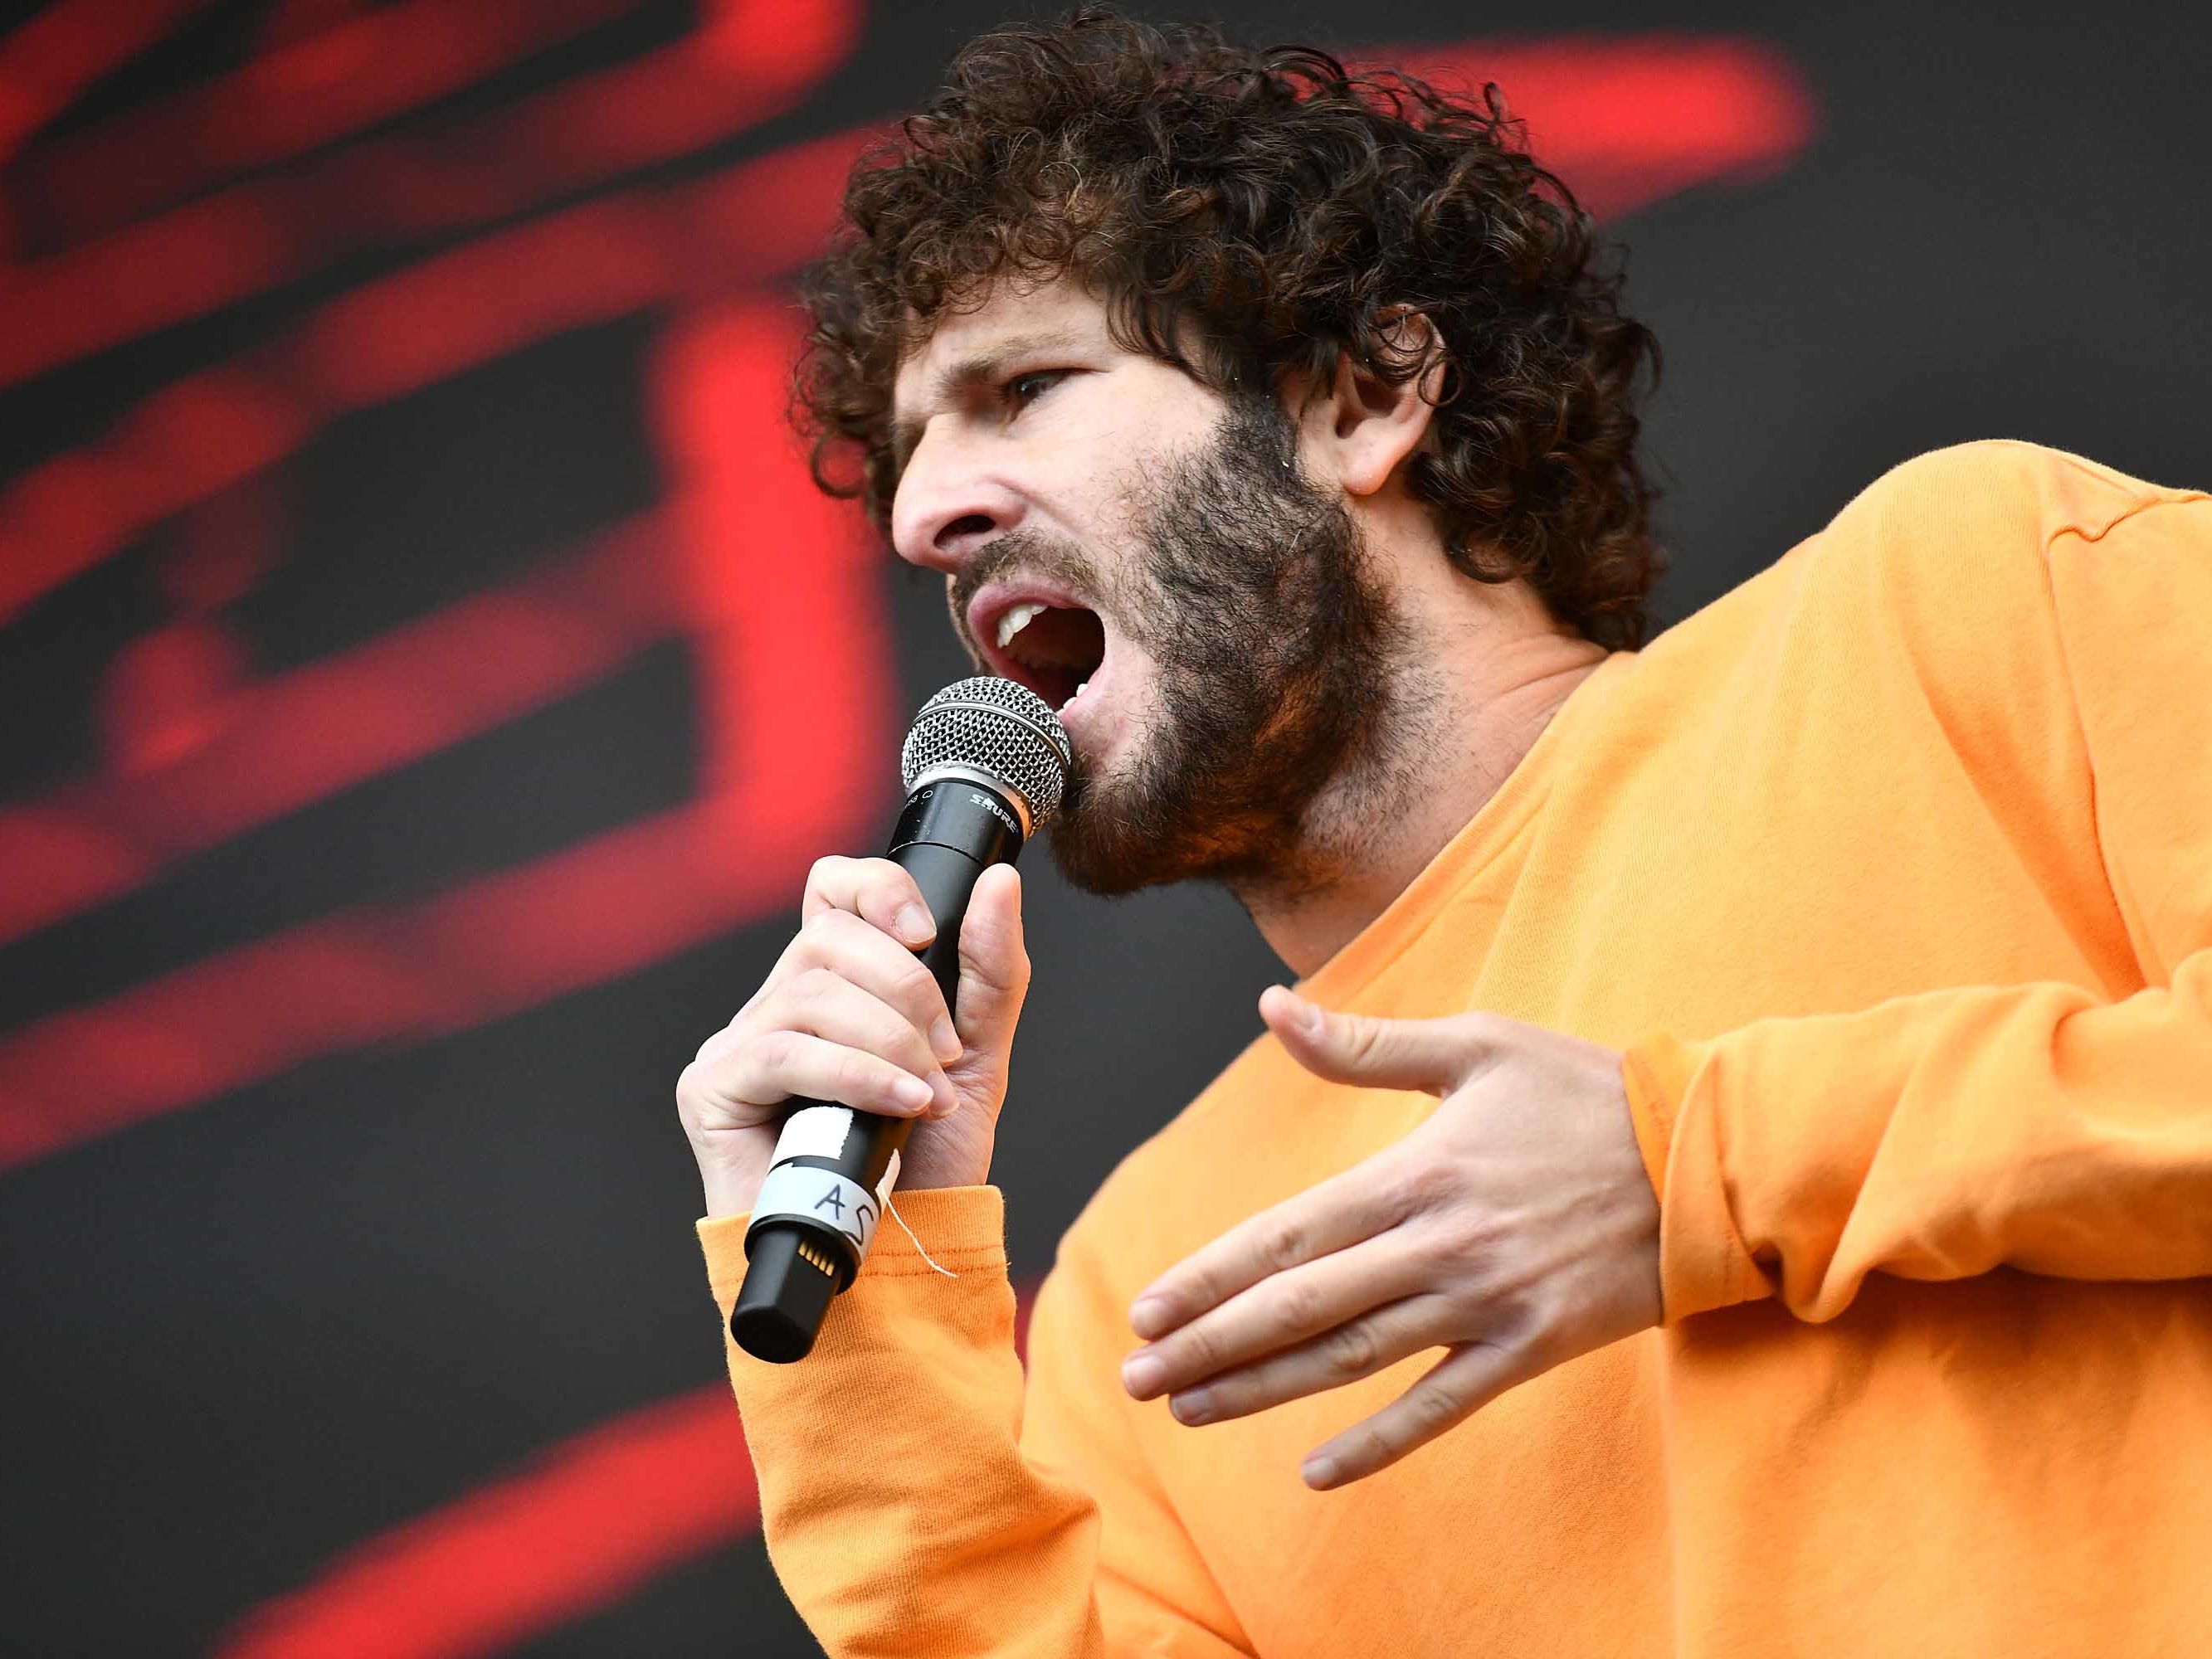 Lil Dicky. Lil Dicky Earth. Lil dick. Little dick. Dick live